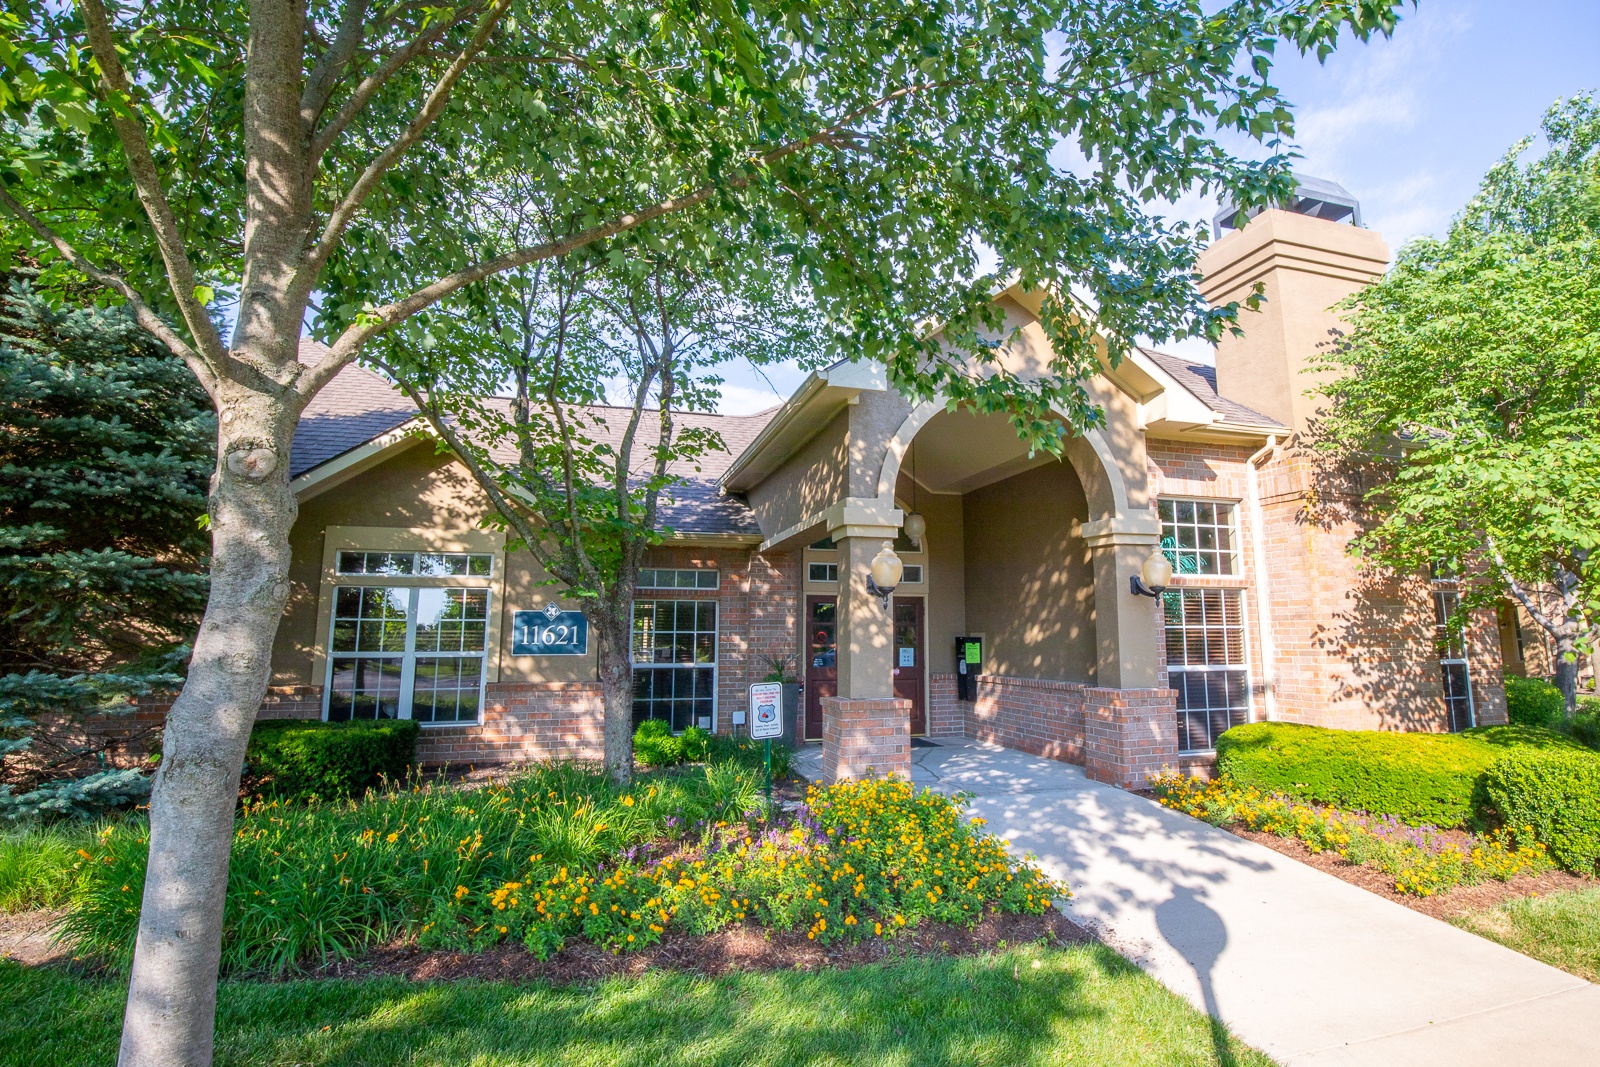 Entrance View at Crowne Chase Apartment Homes, Overland Park, KS